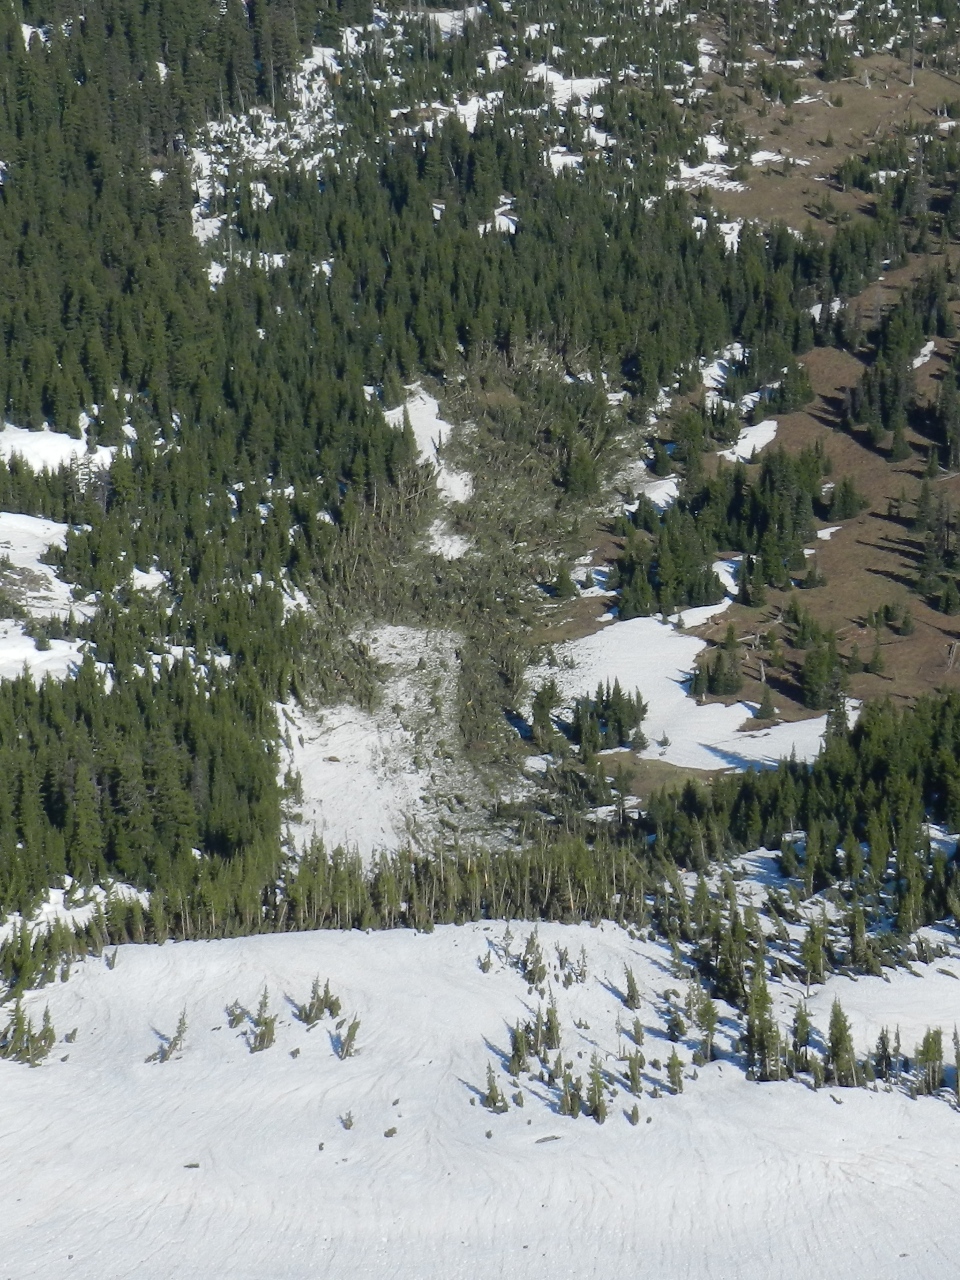 Avalanche runnout on the west side